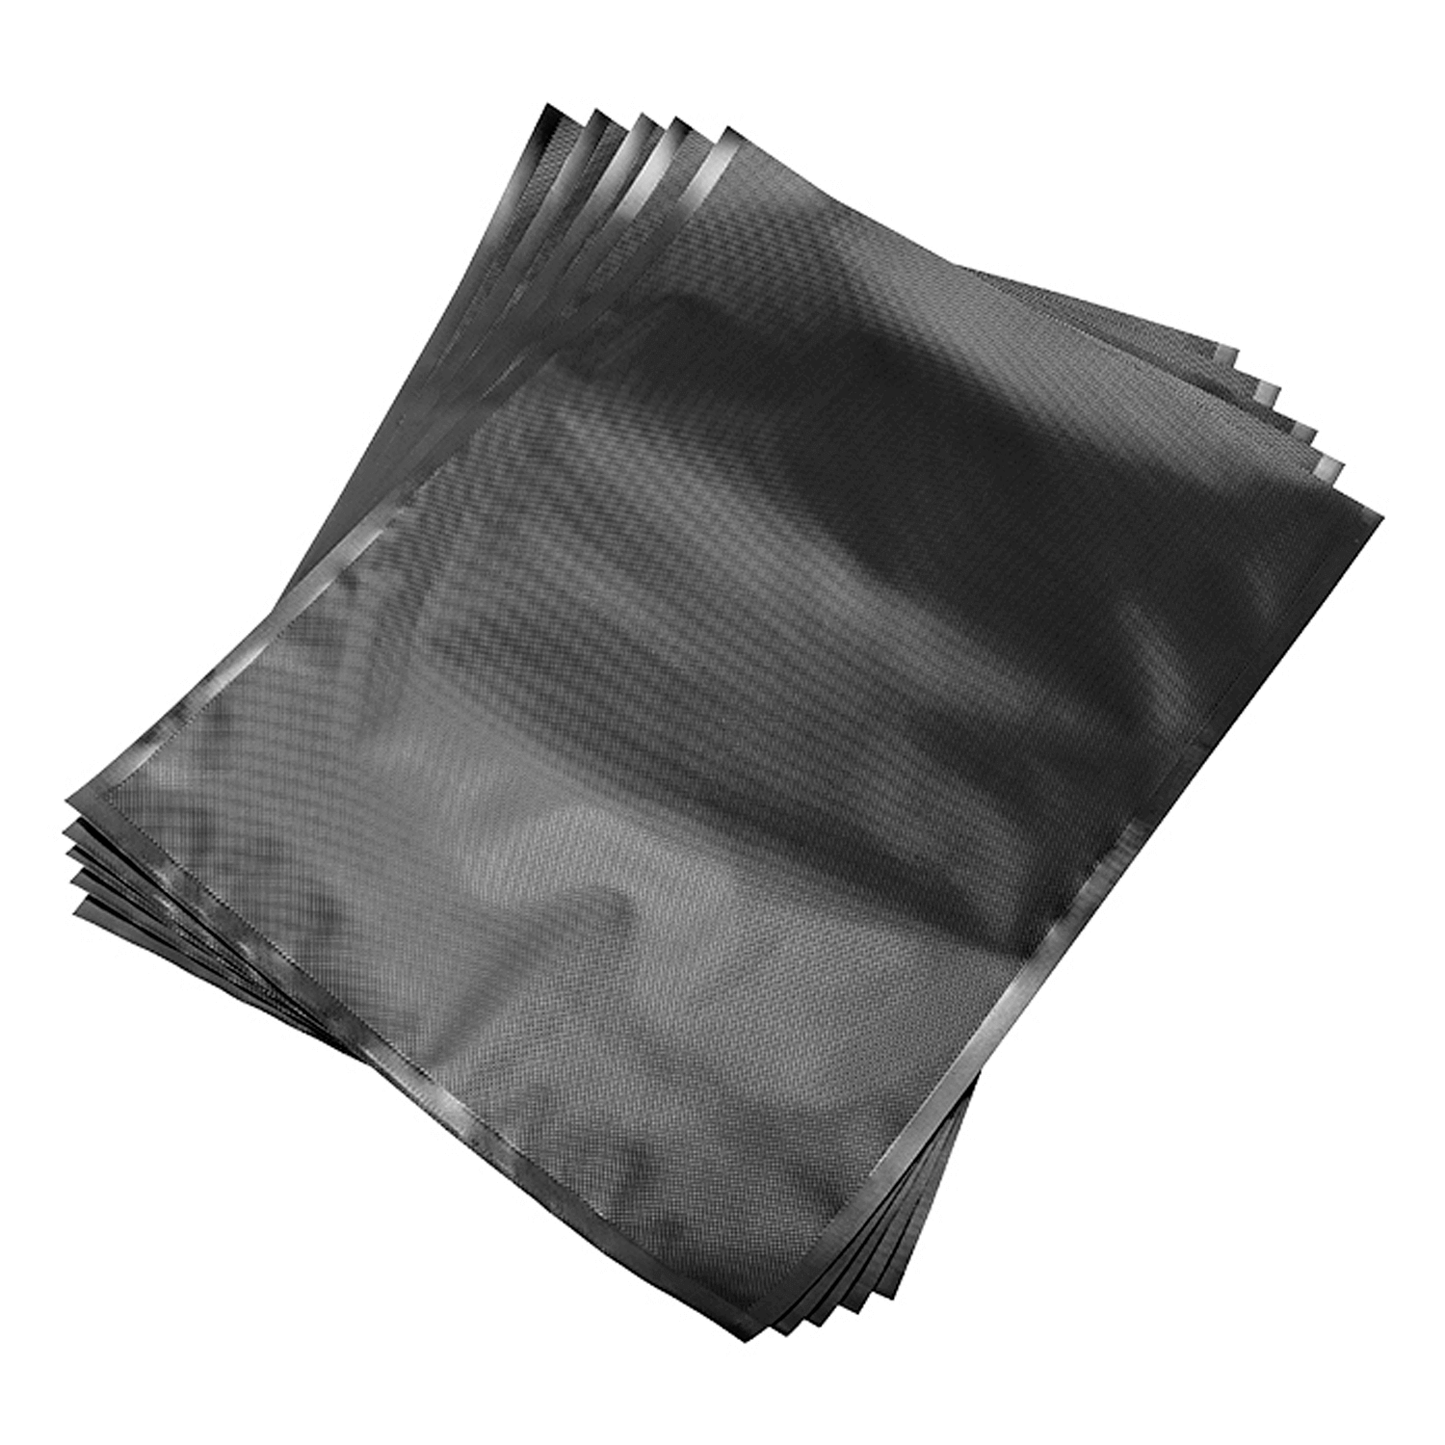 ArmorVac 15"x20" 5mil Precut Vacuum Seal Bags All Black (50 Pack) 131520BK50 Harvest & Extraction